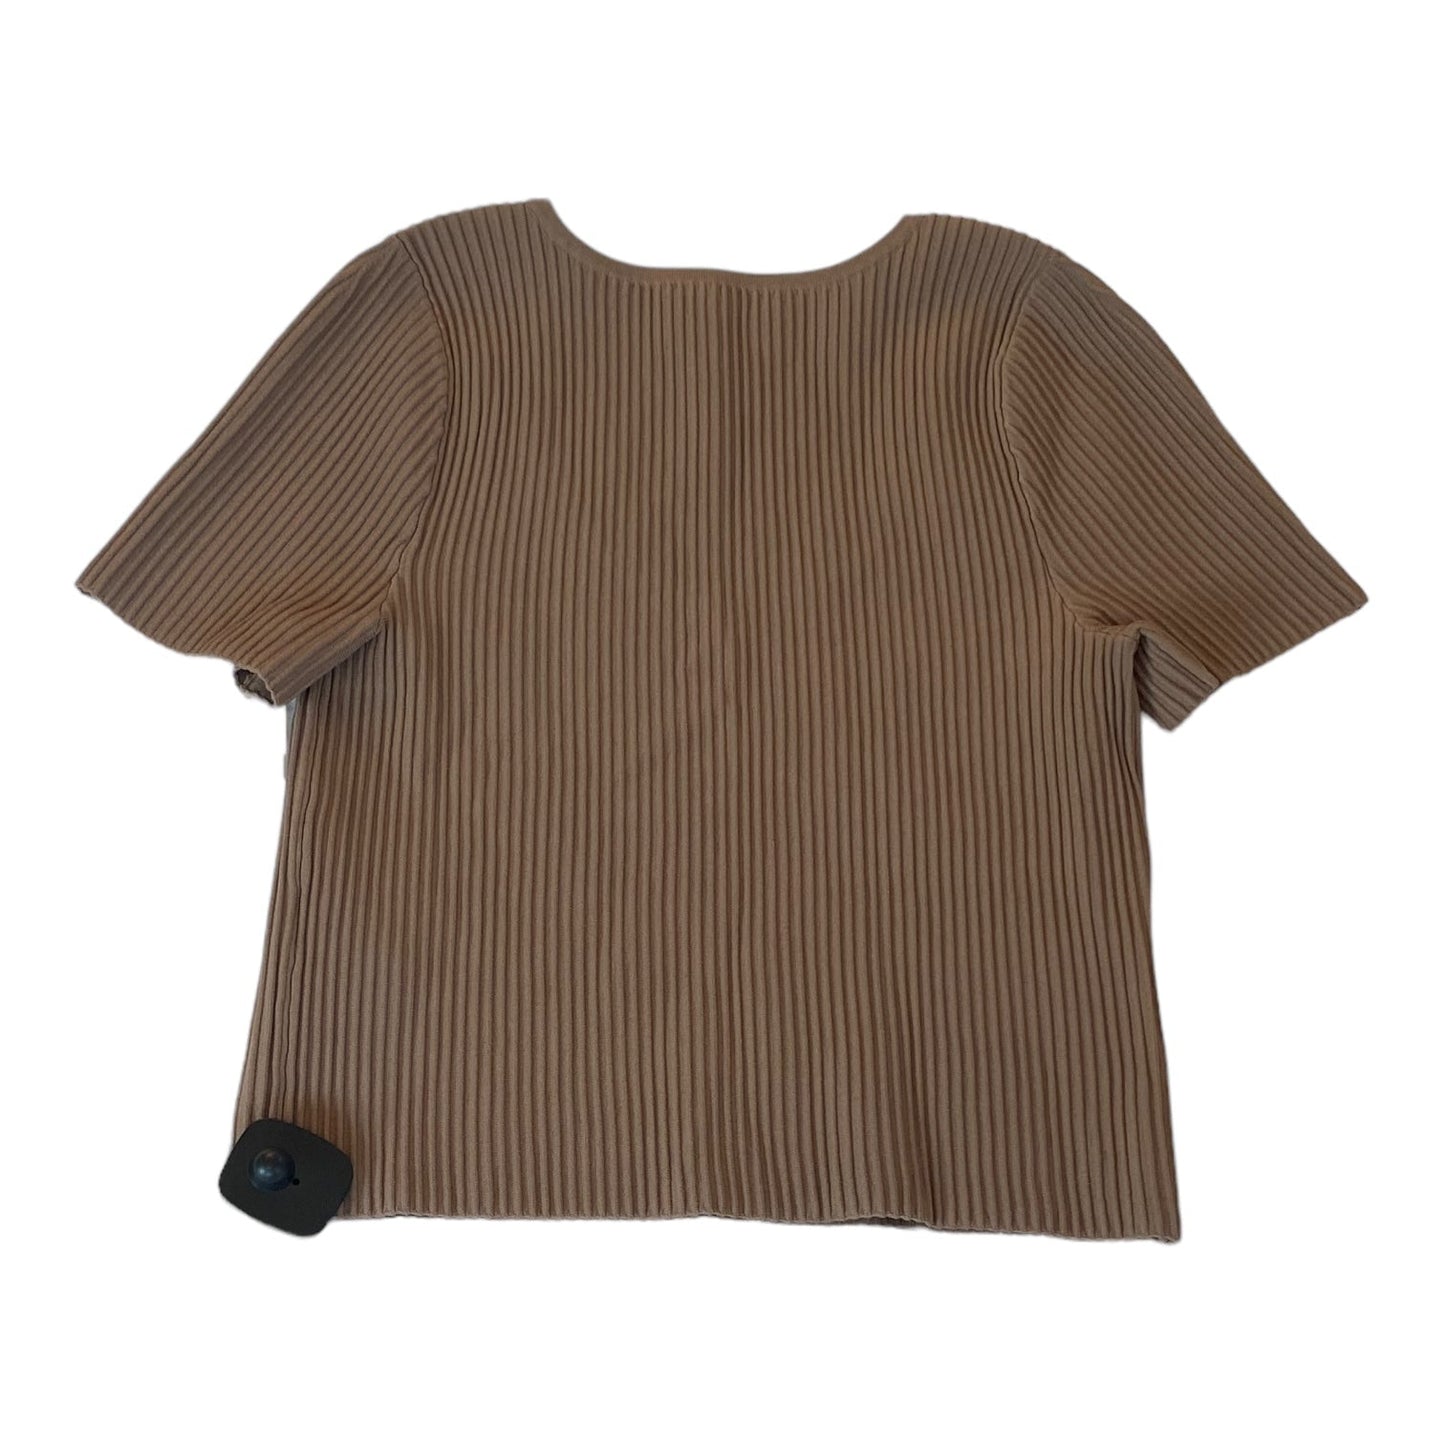 Brown Top Short Sleeve Madewell, Size L